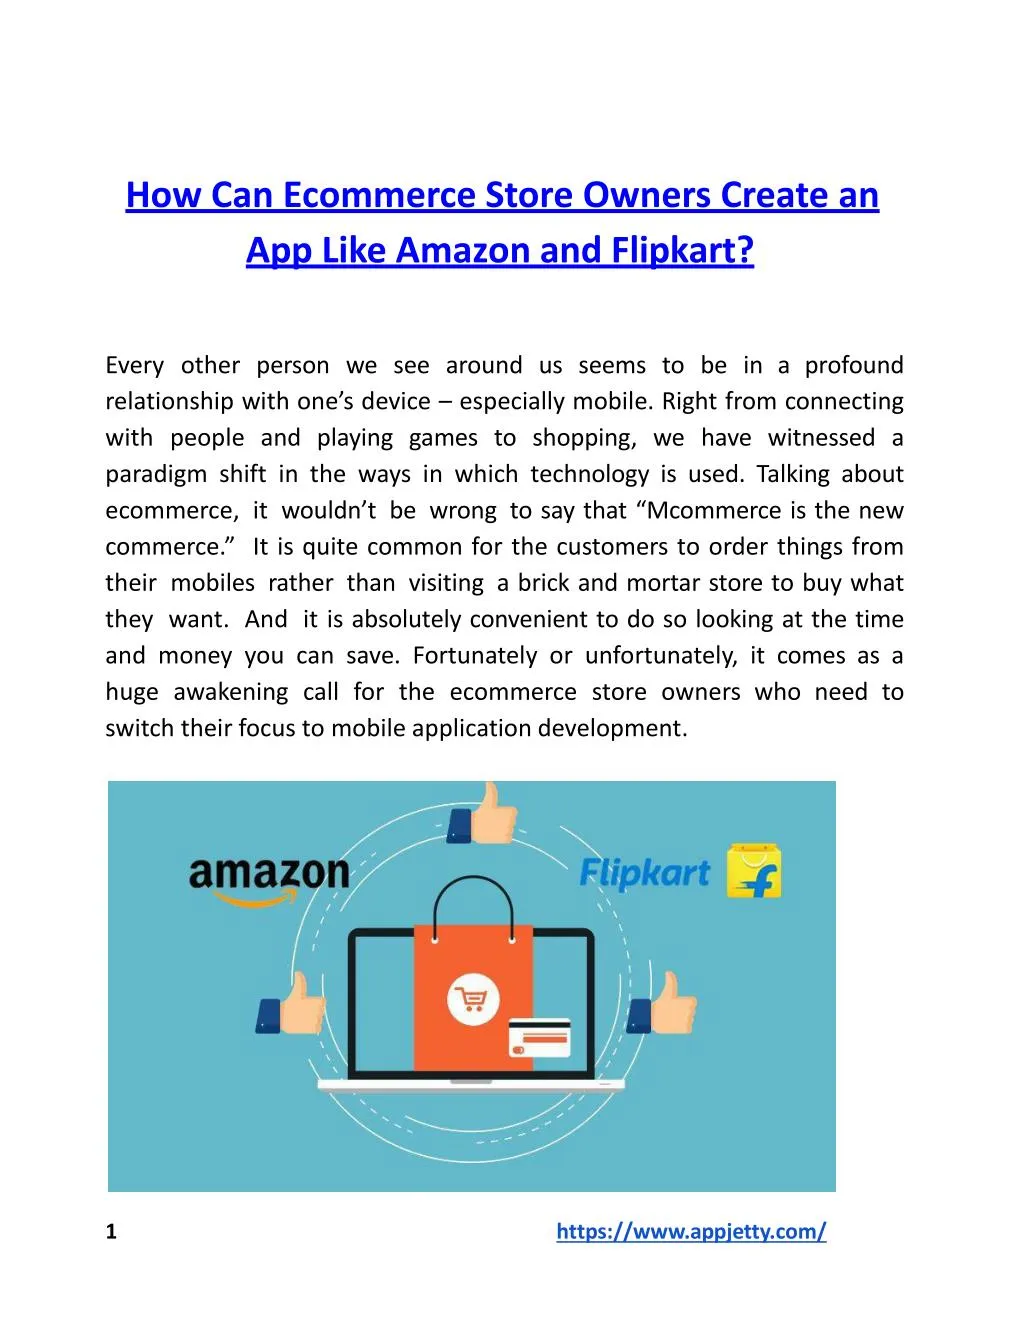 how can ecommerce store owners create an app like